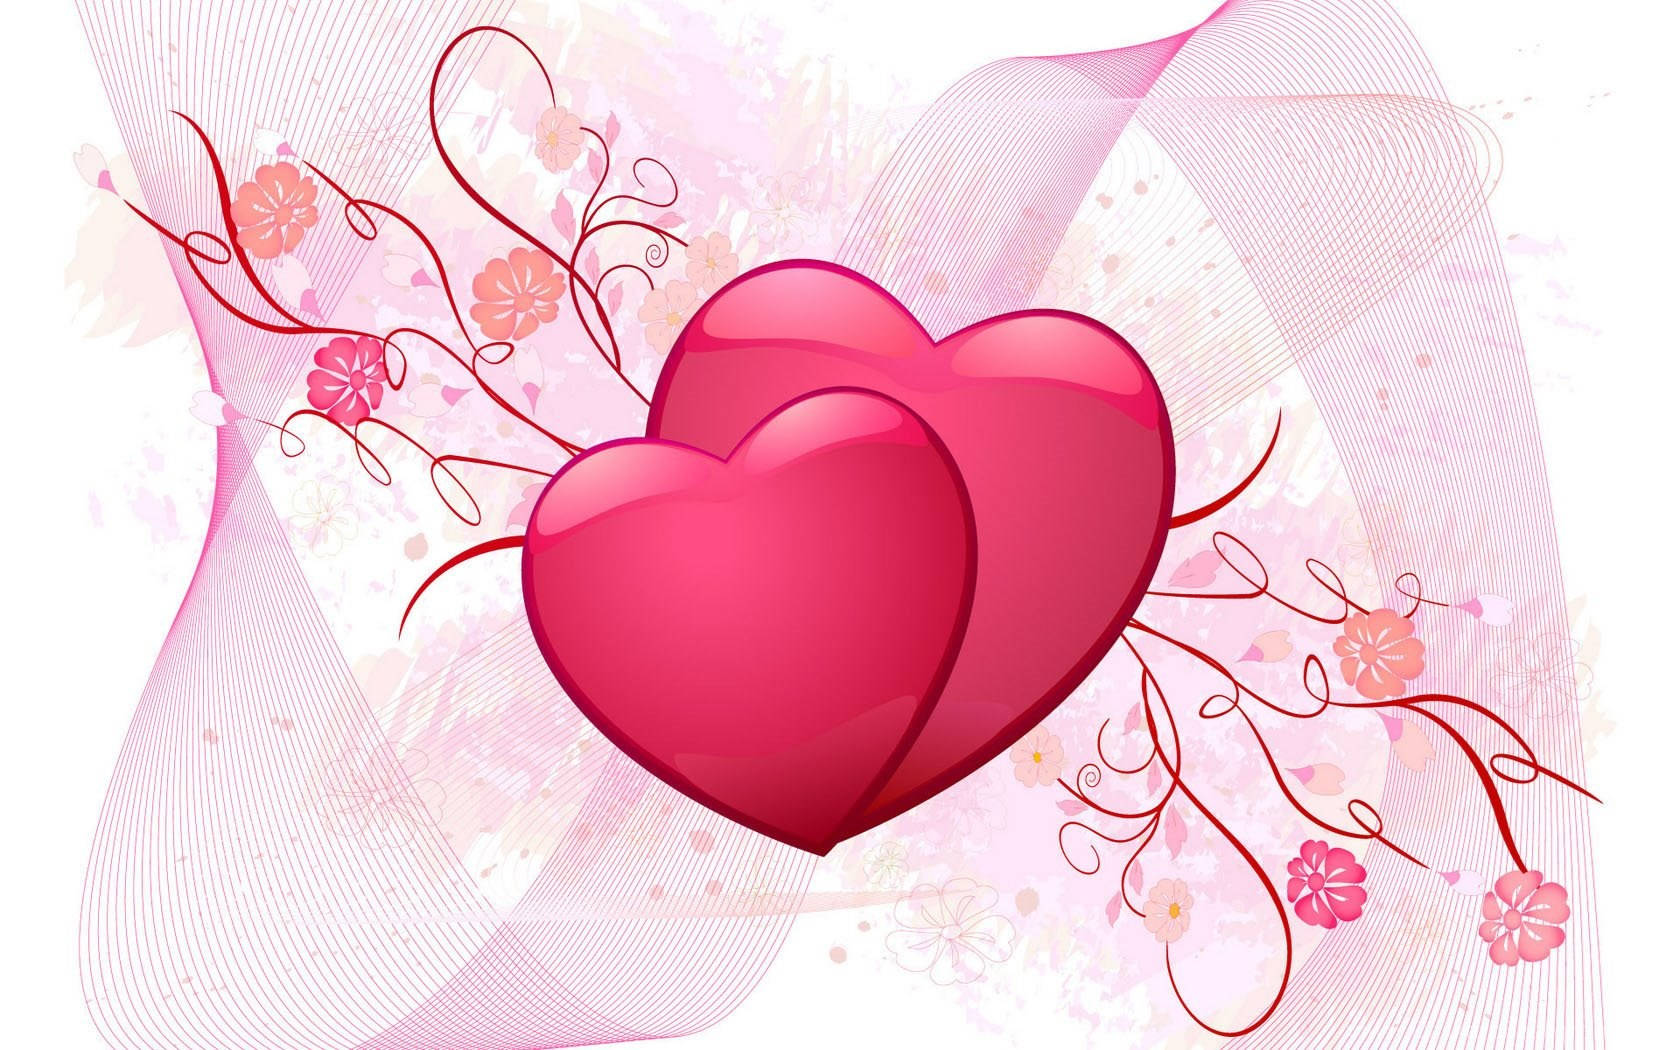 Pink Hearts Of Love For Valentine's Day Wallpaper